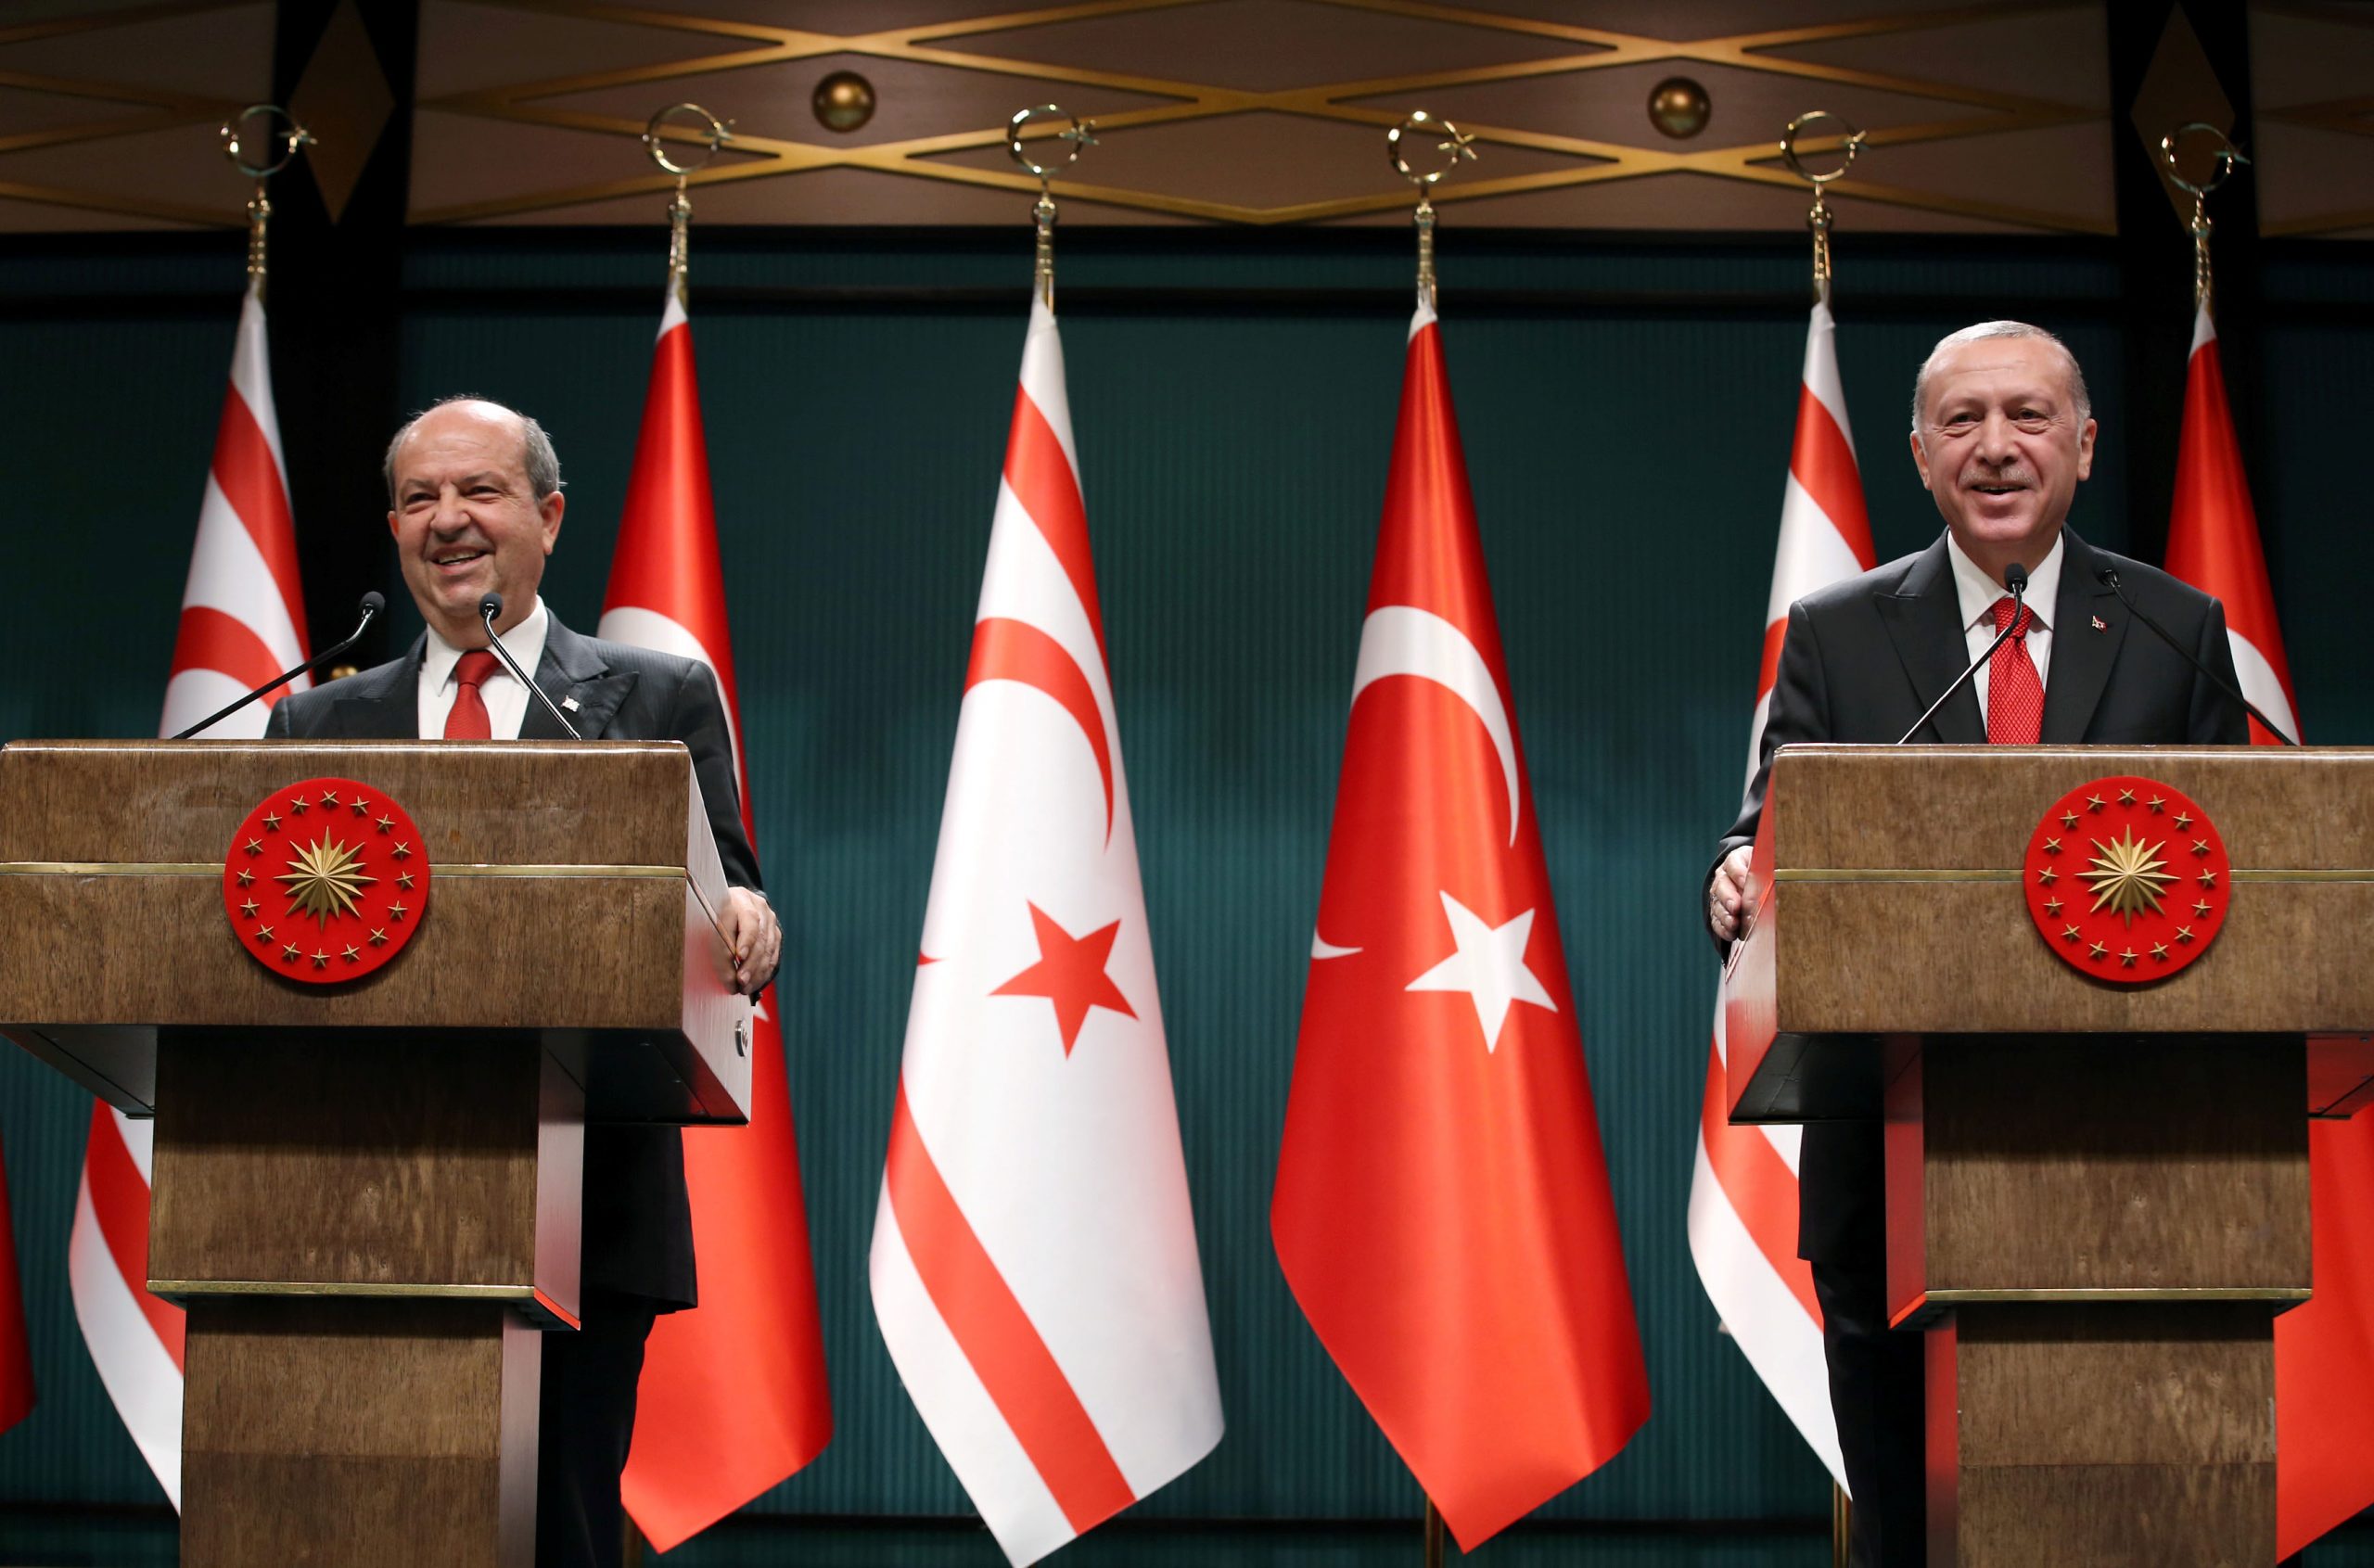 Turkish President Erdogan And Turkish Cypriot Leader Tatar Attend A News Conference In Ankara